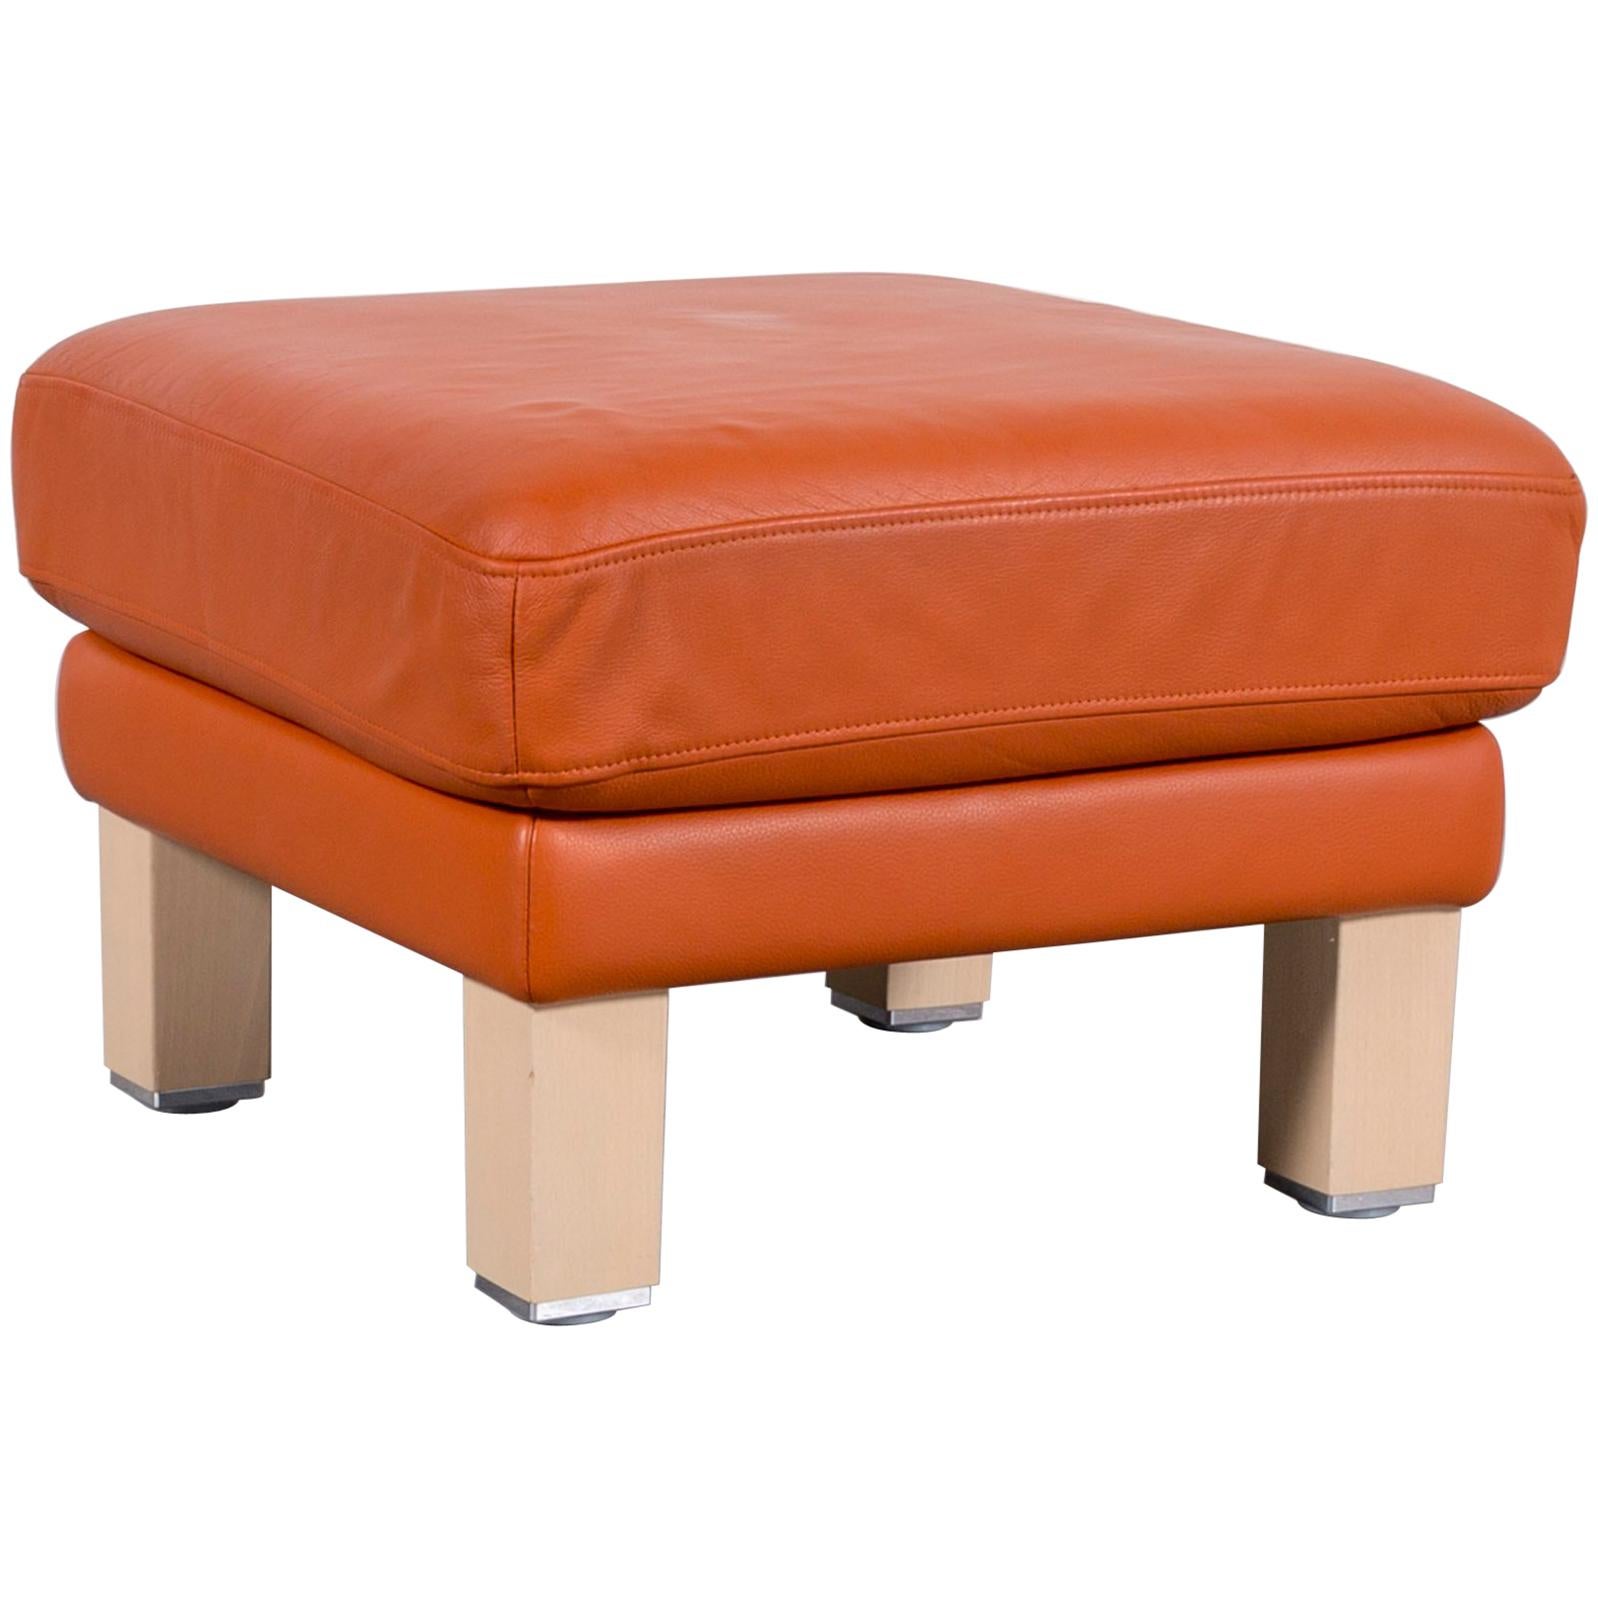 Rolf Benz Leather Foot-Stool Orange Bench For Sale